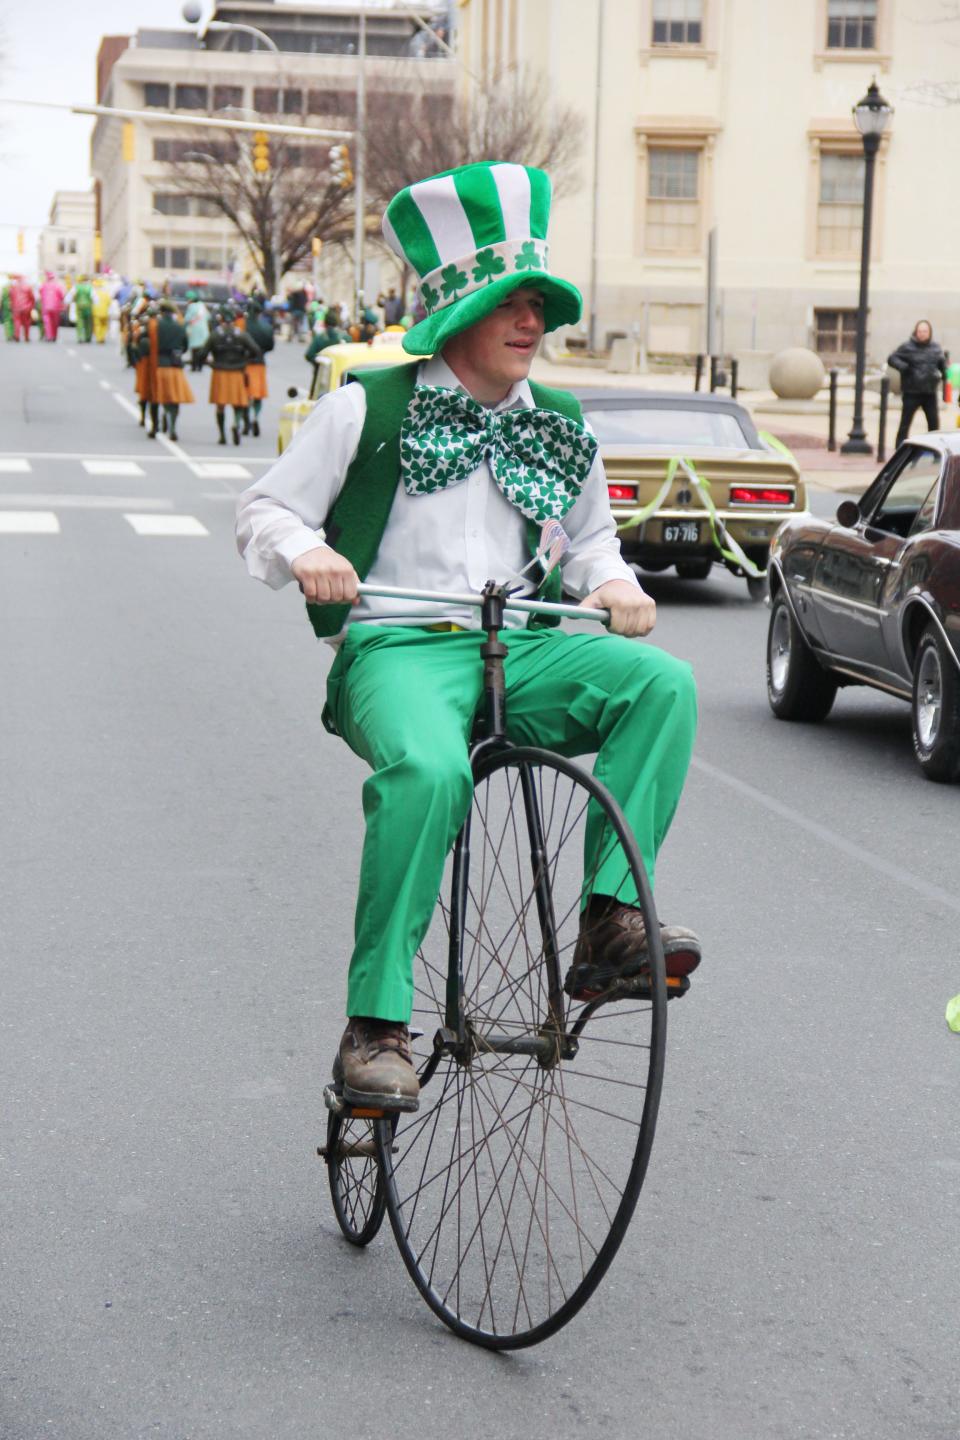 The 46th annual St. Patrick's Day parade draws hundreds to downtown Wilmington on Saturday, March 11, 2023.